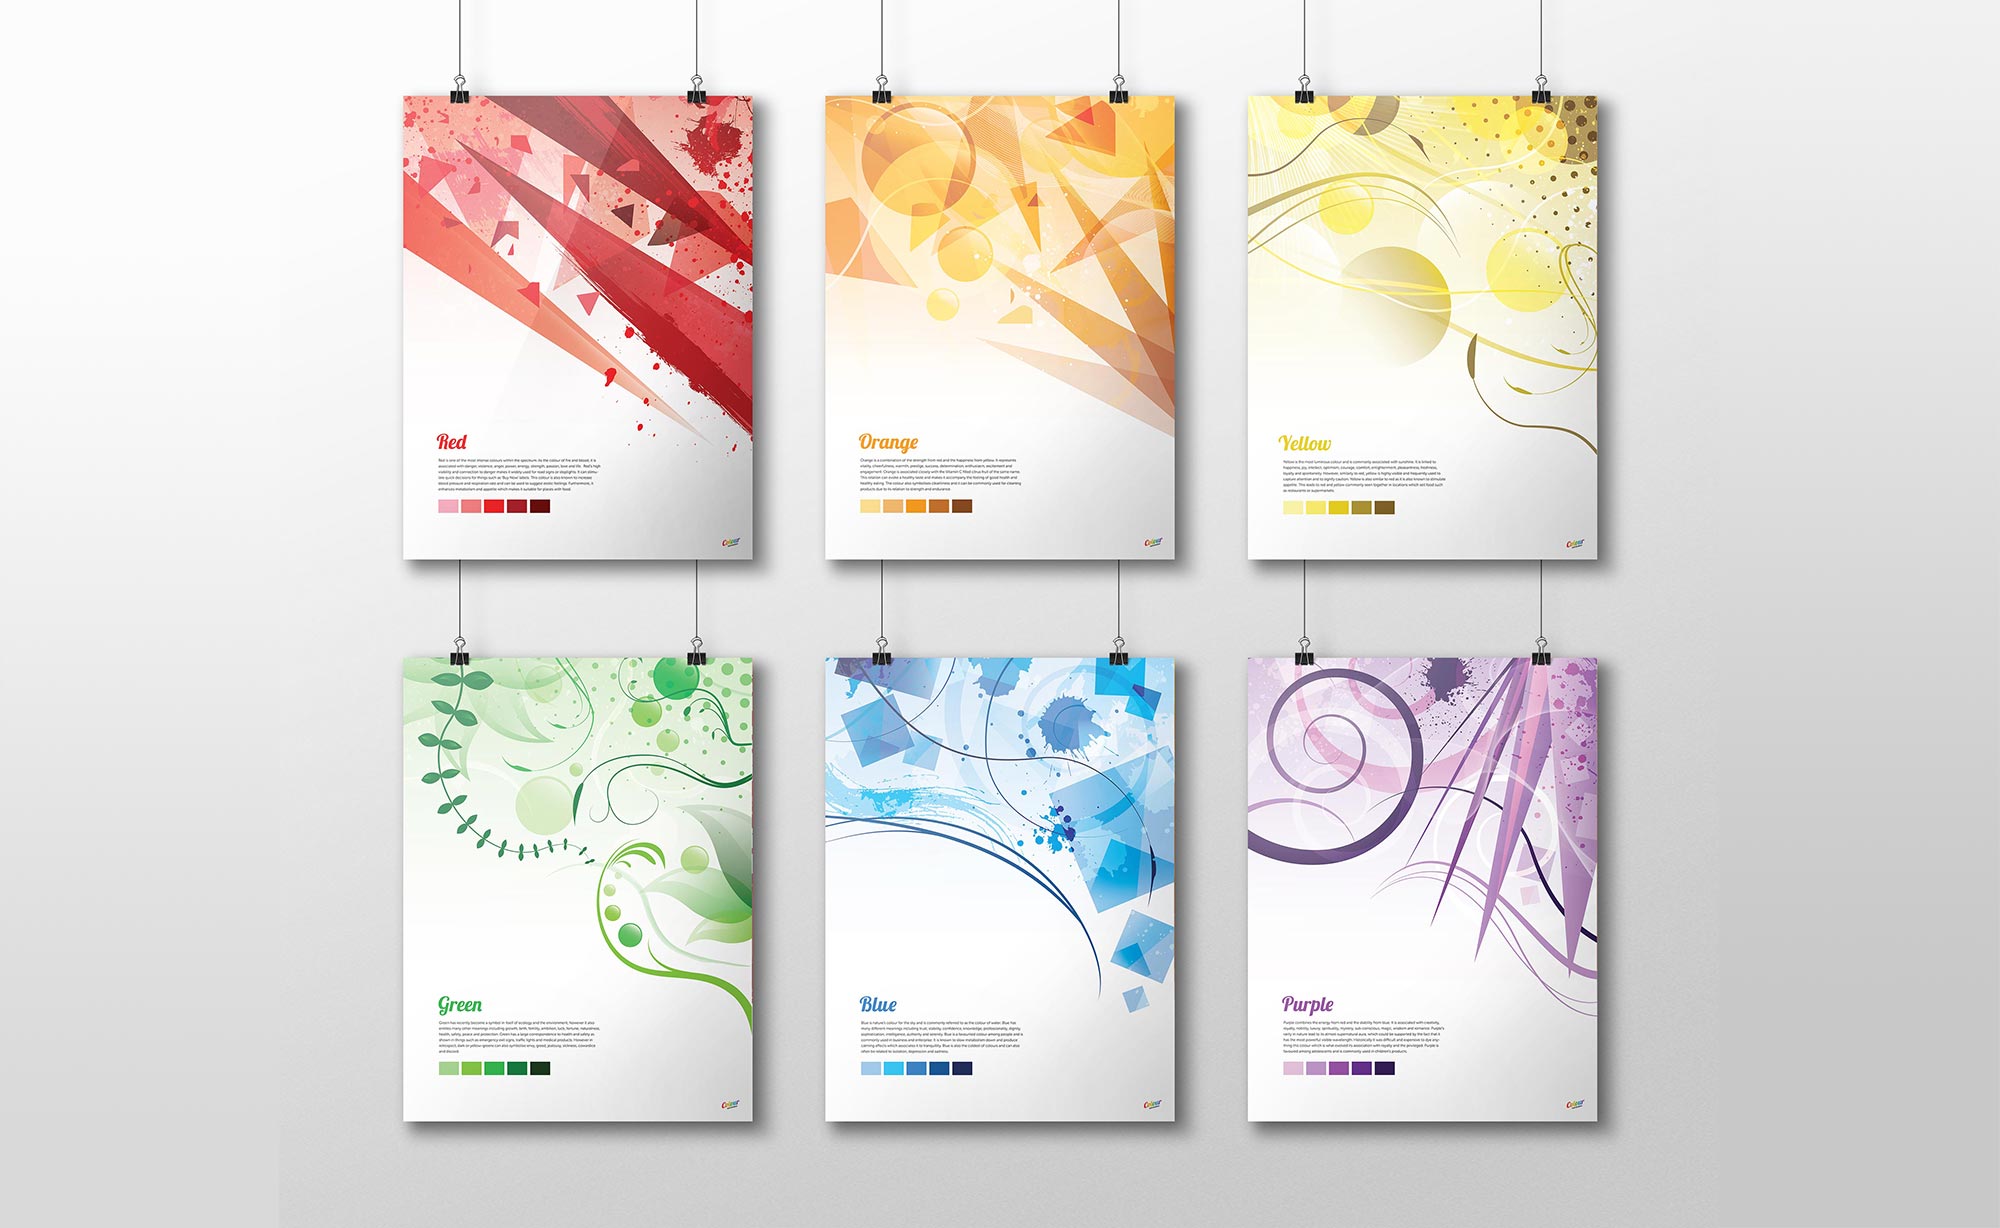 Colour Theory Inspired Posters